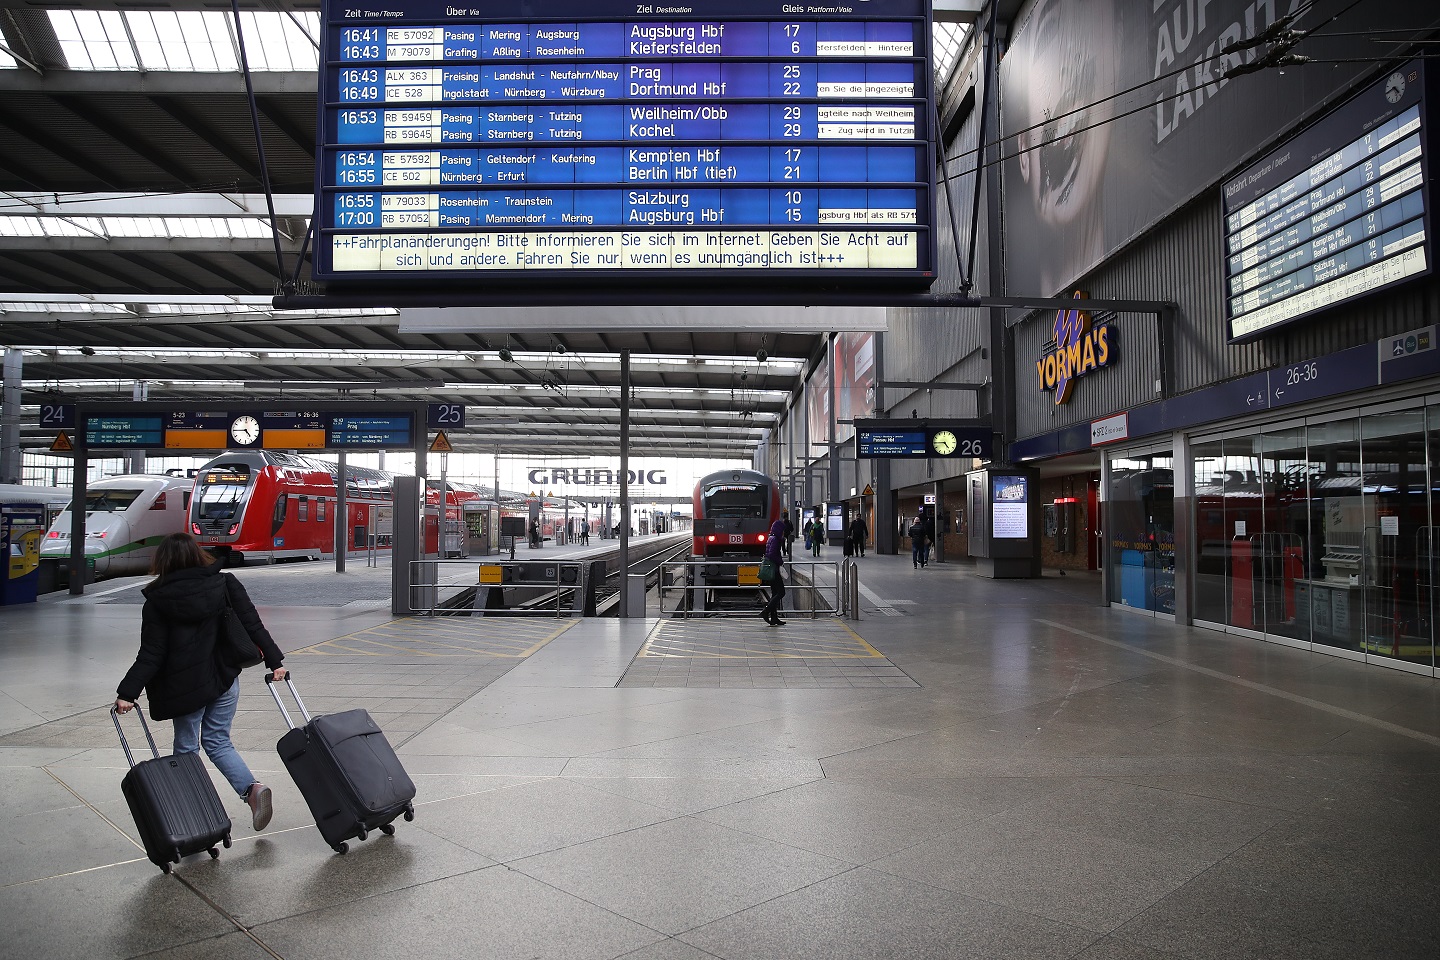 A photograph of a woman is seen at the Munich Main Station during the coronavirus crisis on March 31, 2020 in Munich, Germany.